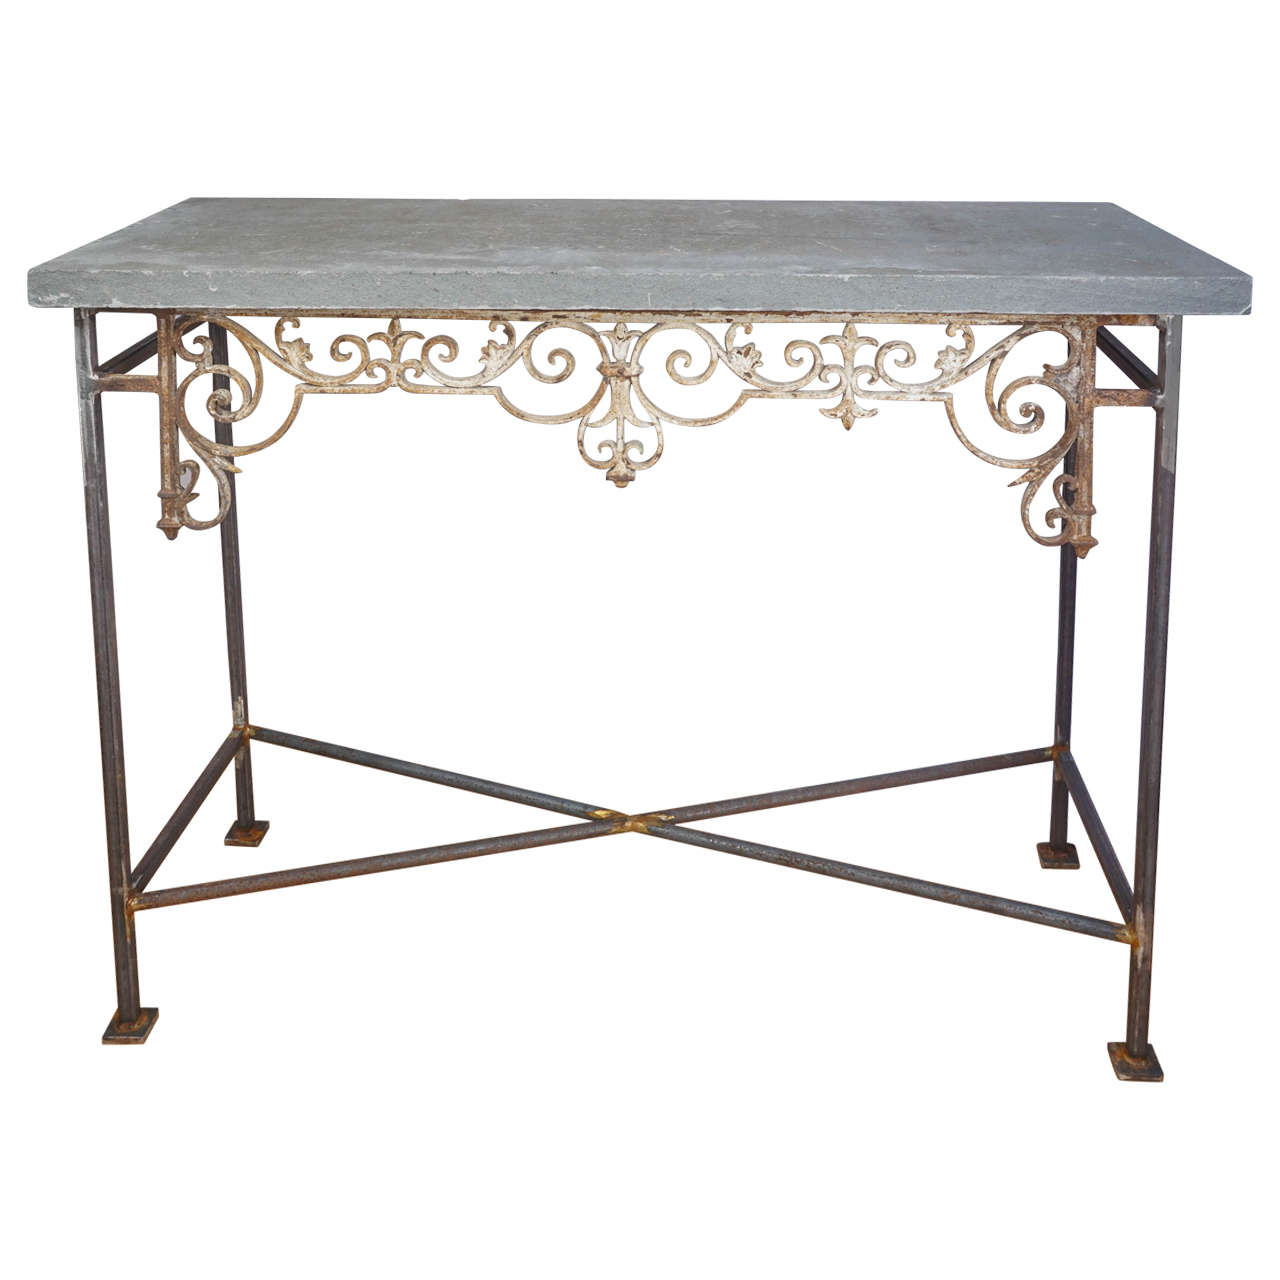 Architectural Iron Console with Hudson Valley Bluestone For Sale